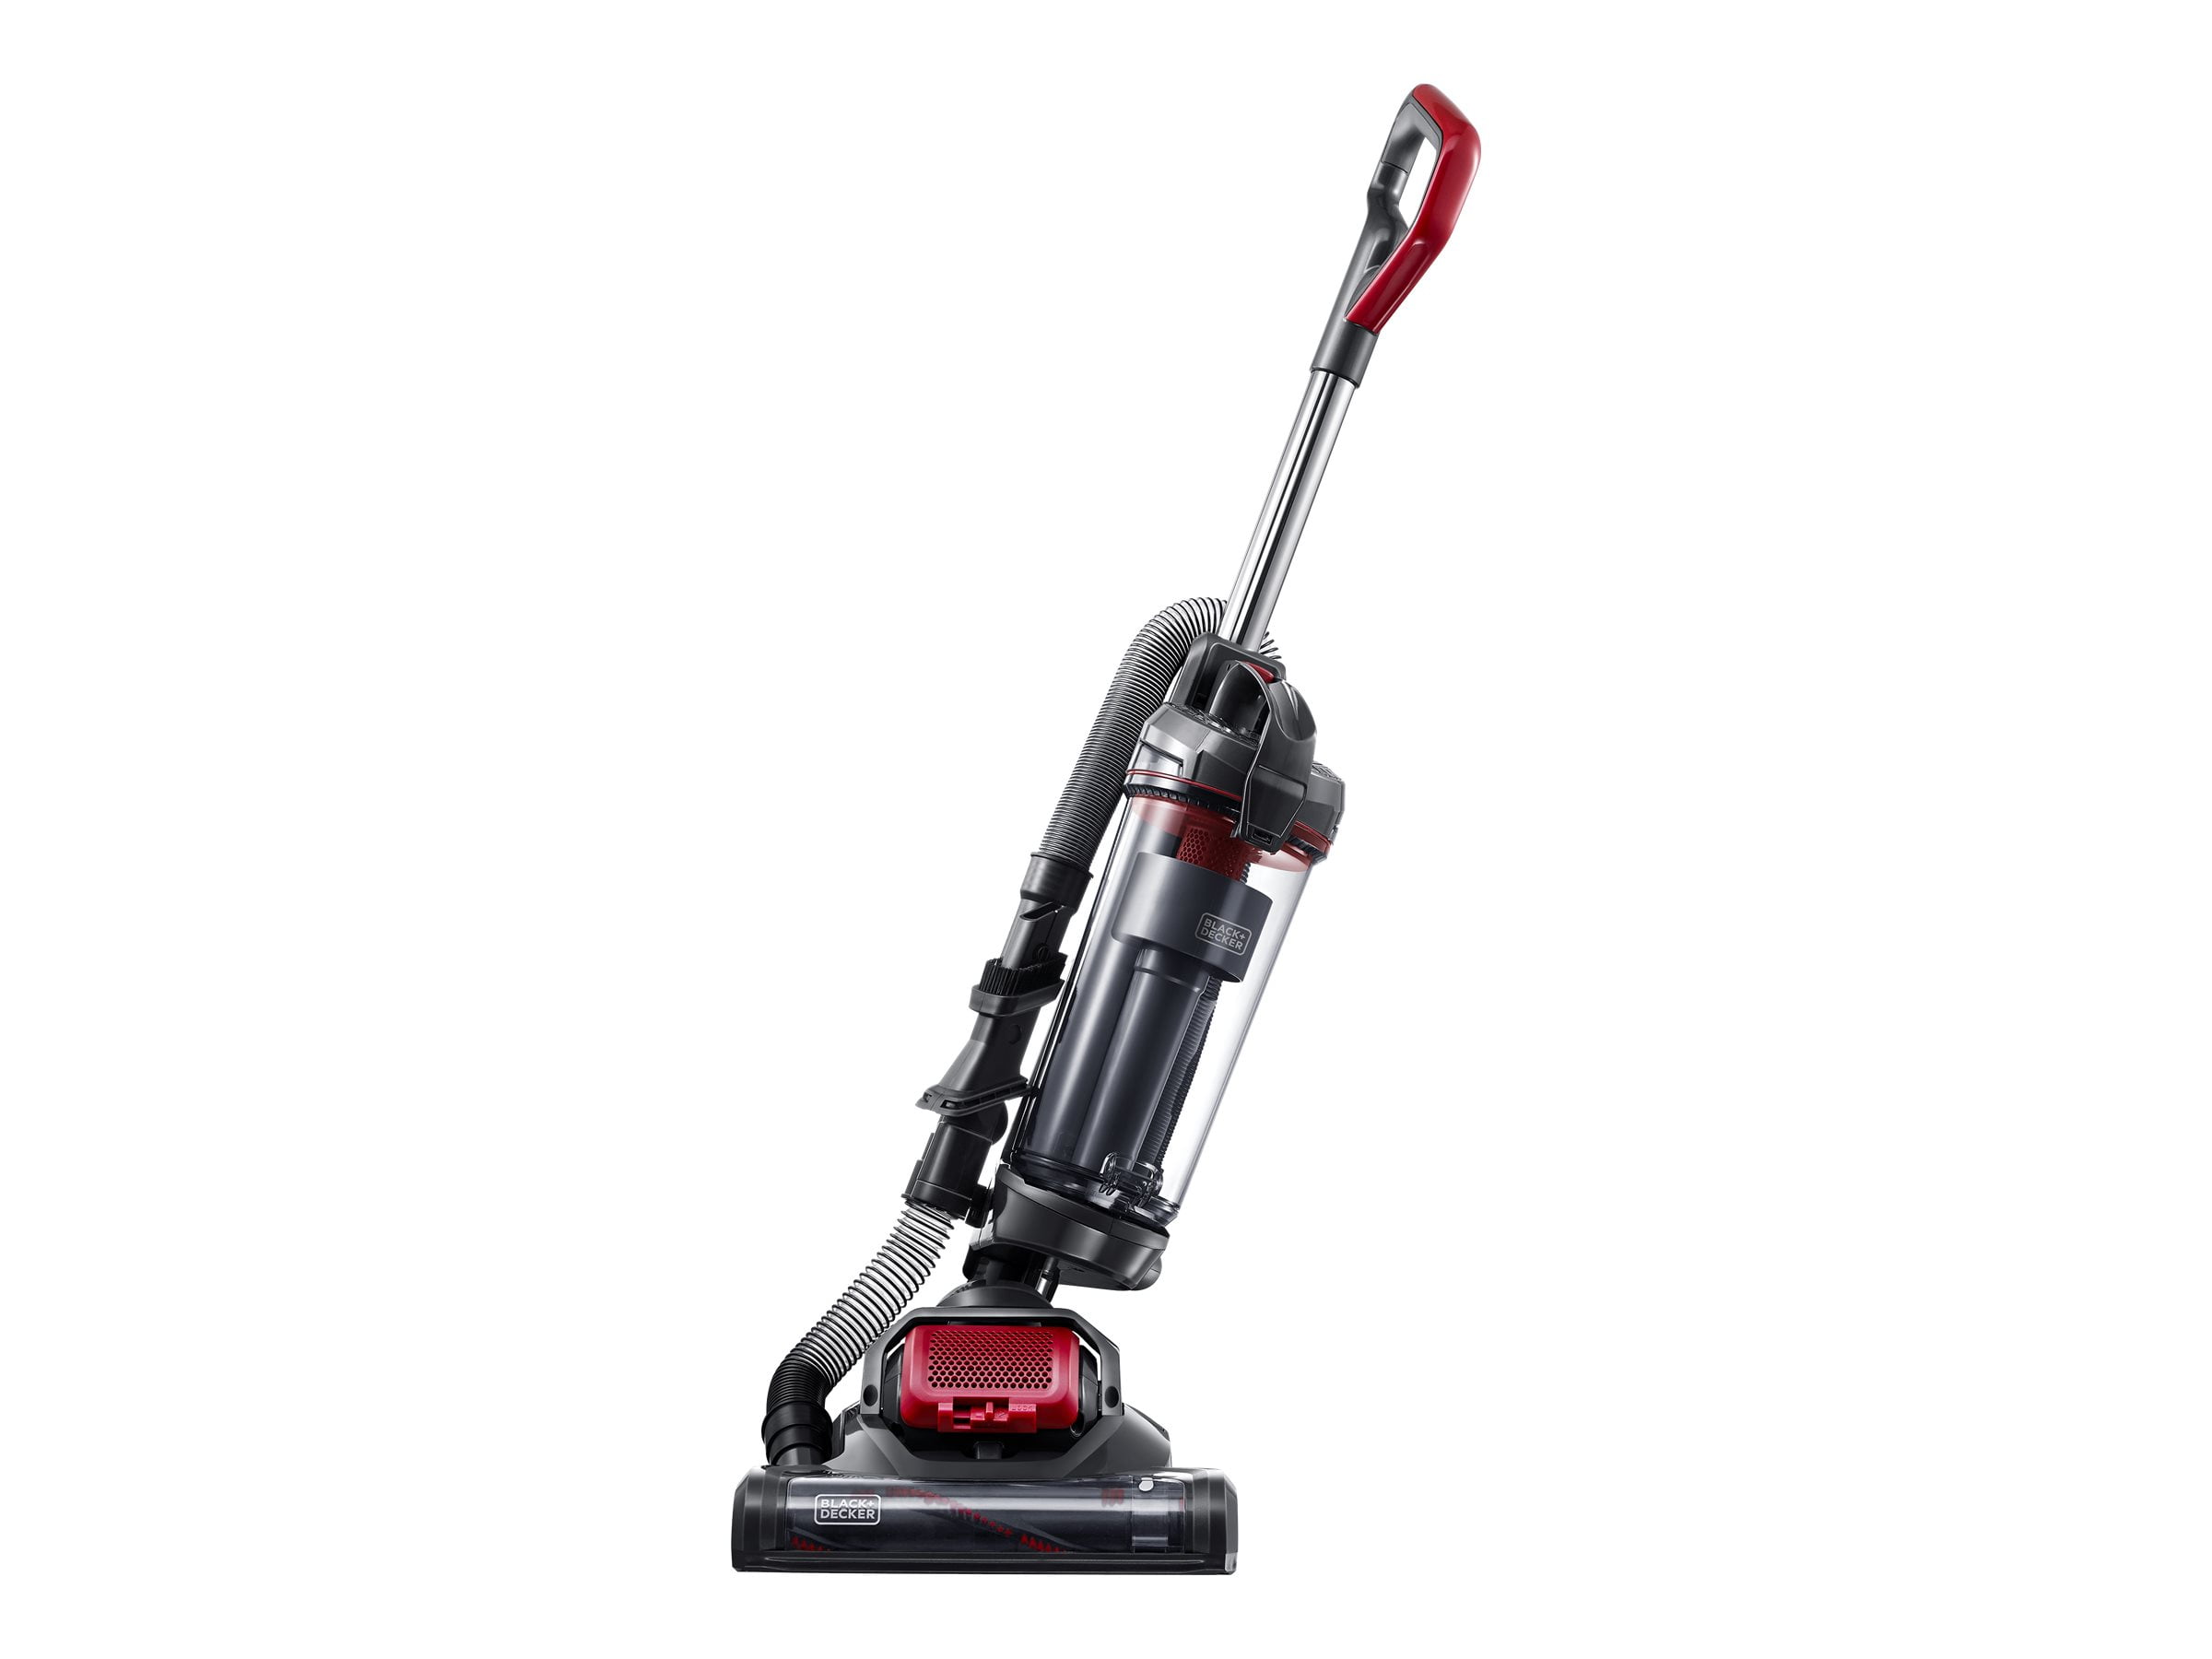 Vacuum cleaner Black+Decker Lightweight Compact for Sale in Culver